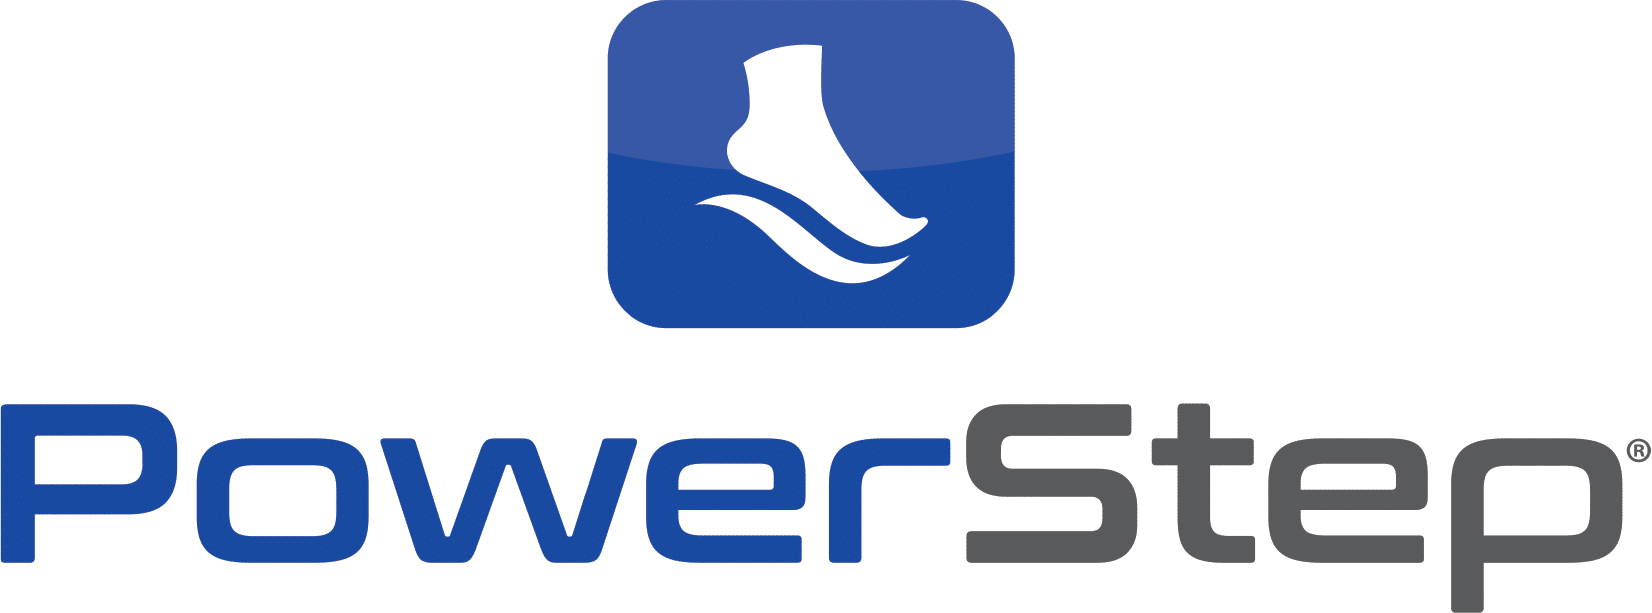 Powerstep-Logo-for-Site.png